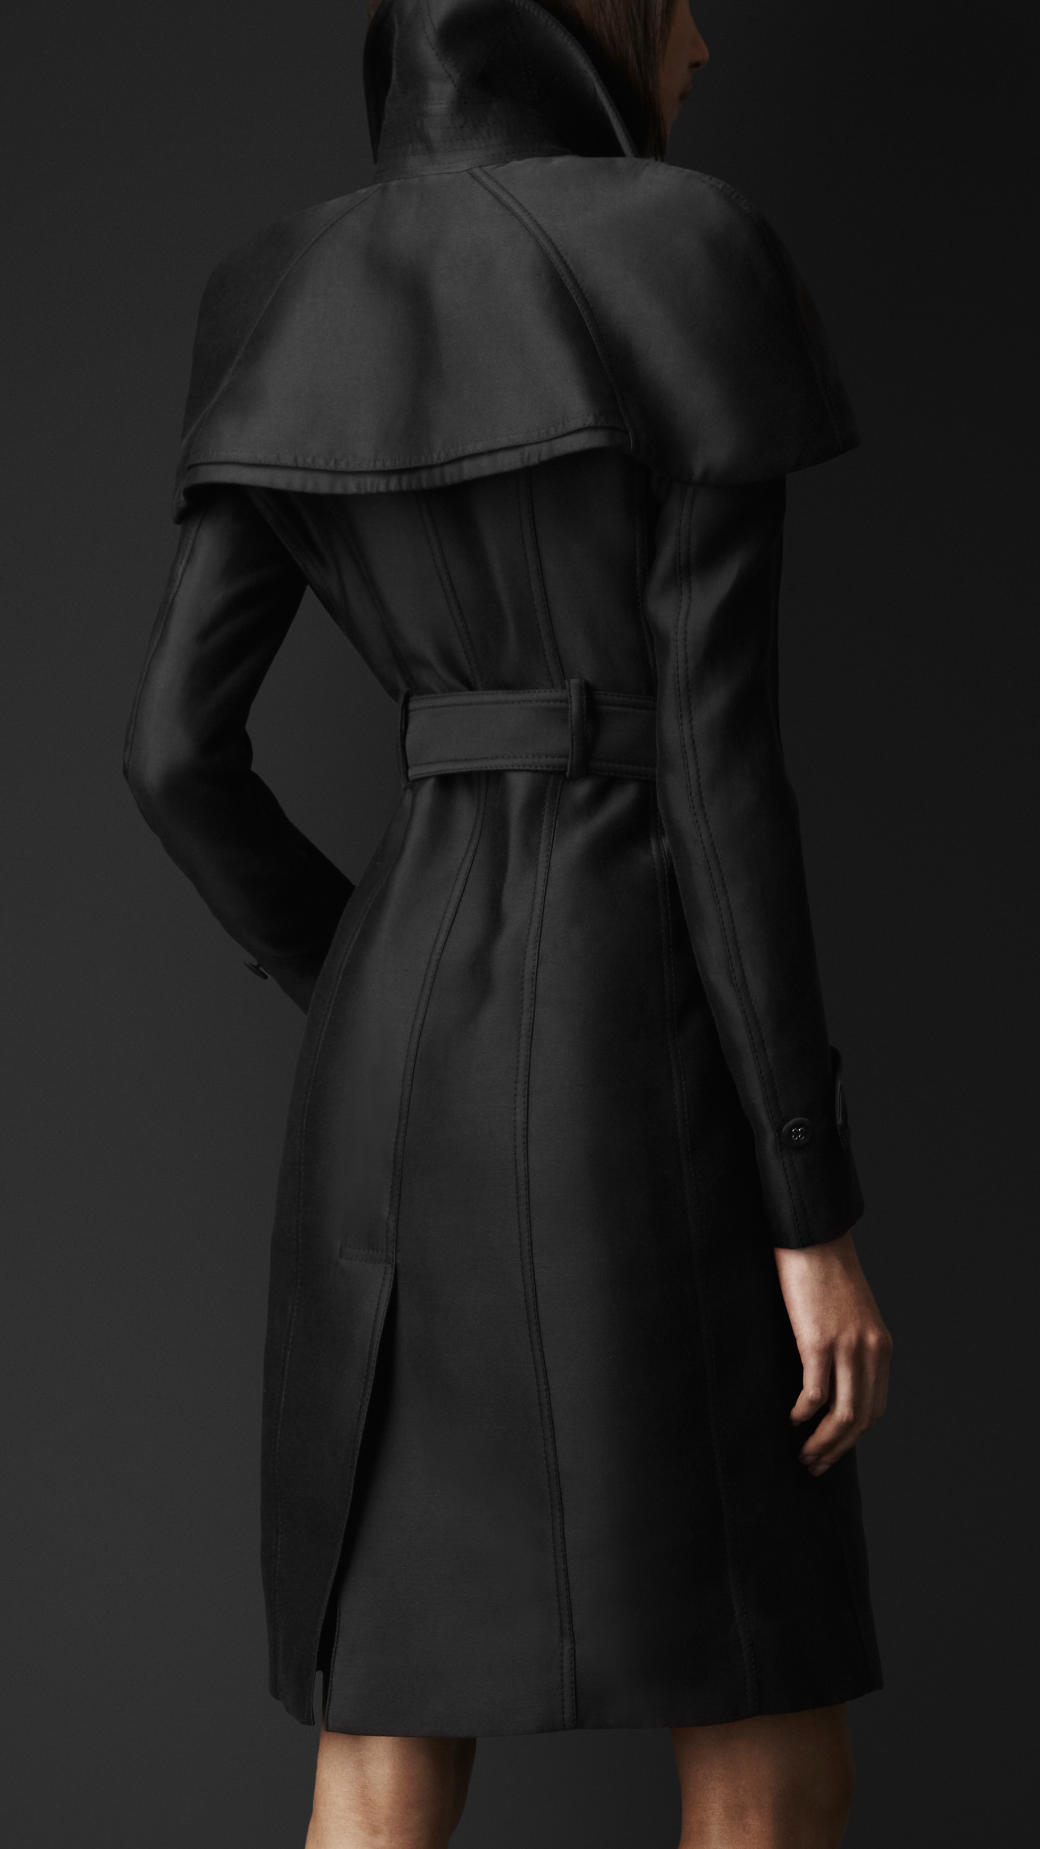 Lyst - Burberry Prorsum Double Duchess Caped Trench Coat in Black